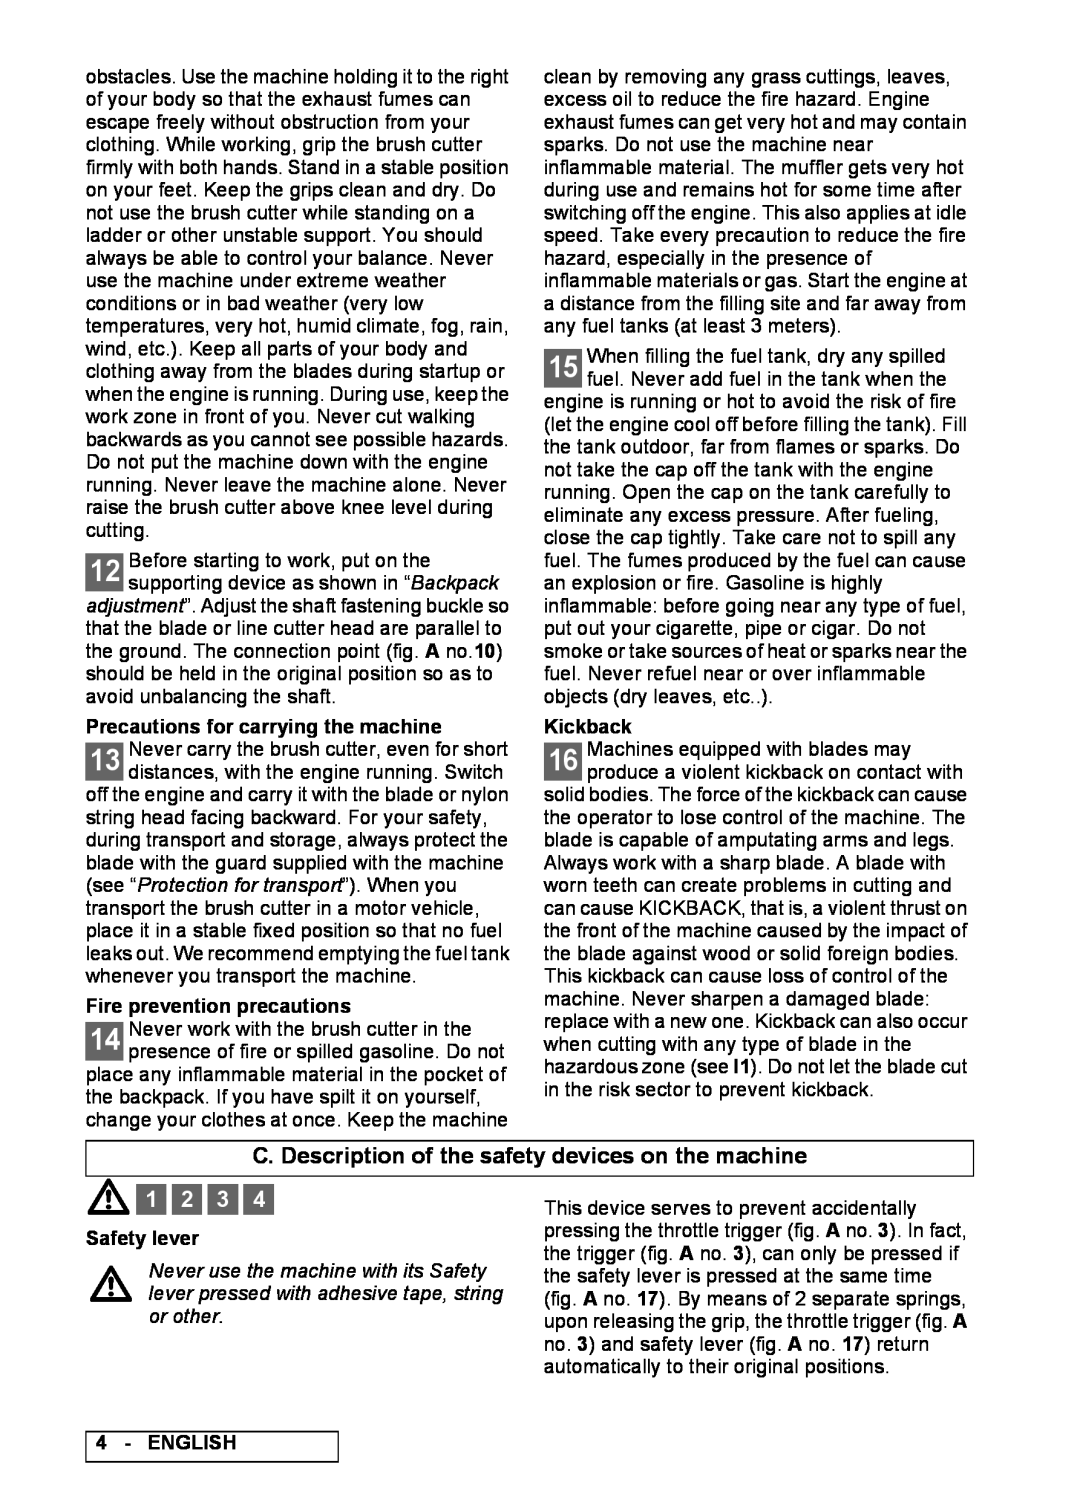 Electrolux B 522X BP manual C. Description of the safety devices on the machine, 1 2, Precautions for carrying the machine 